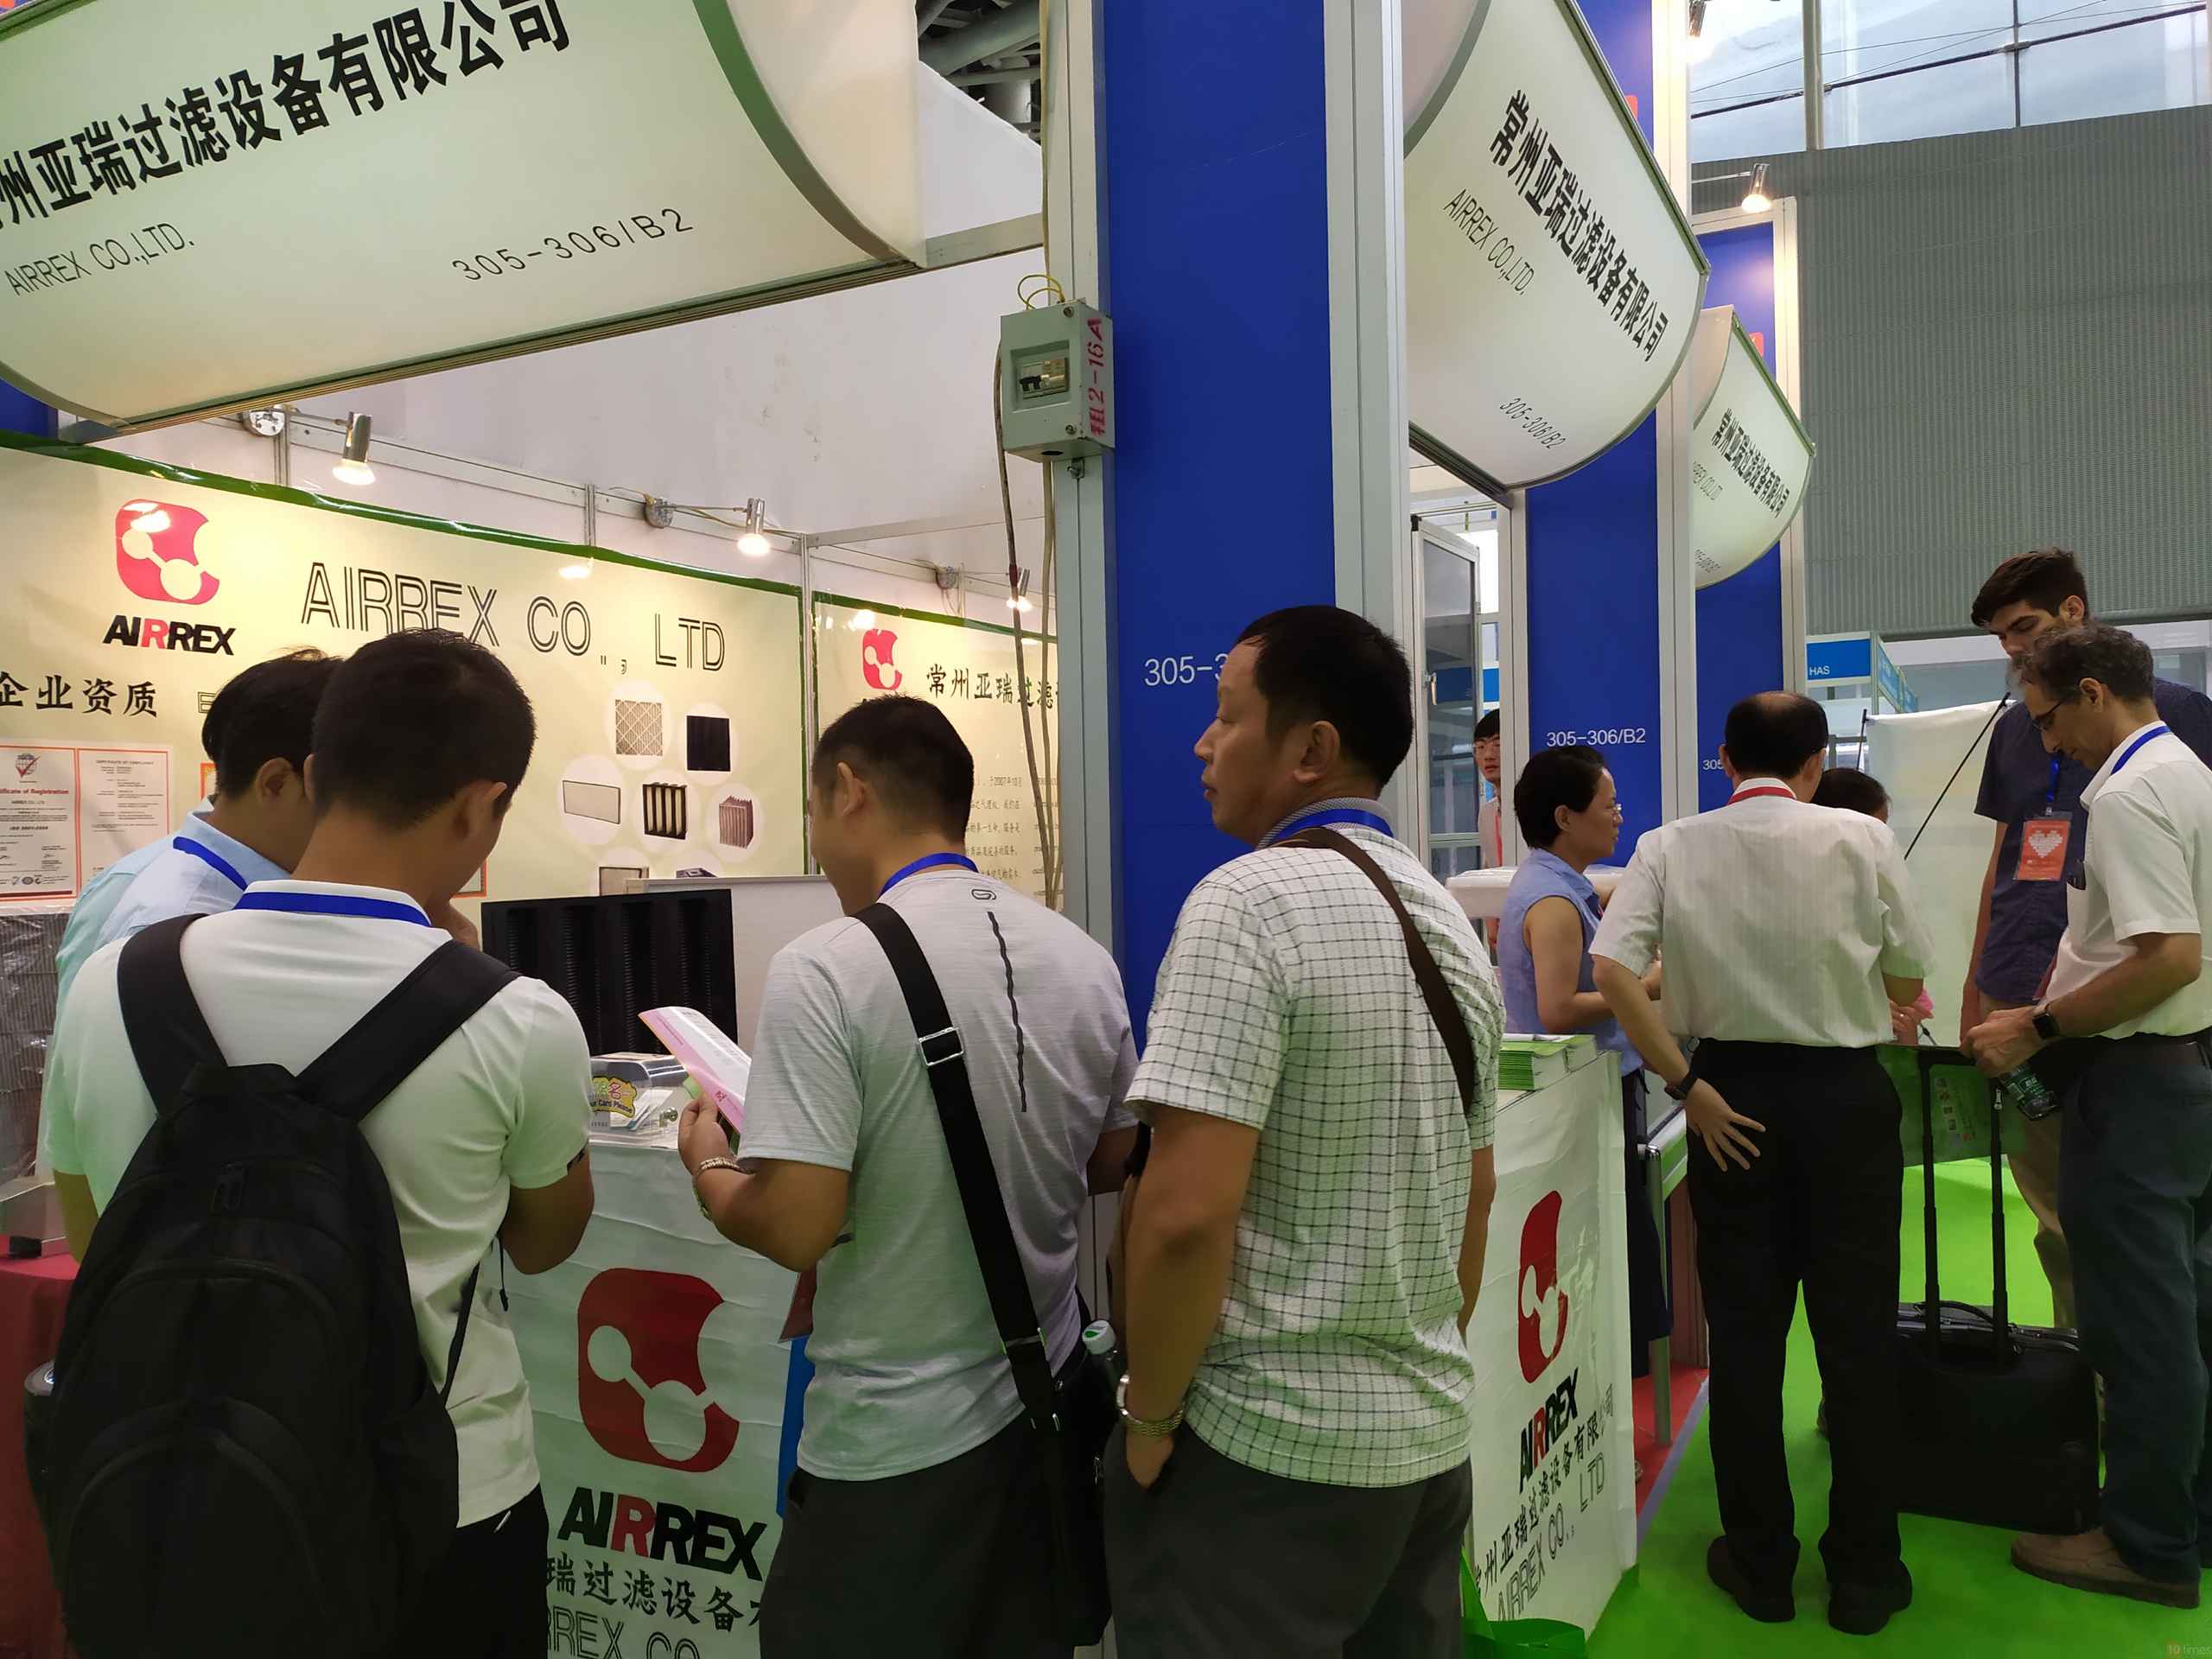 Cleanroom Guangzhou Exhibition (Aug 2024), Asia Pacific Cleanroom